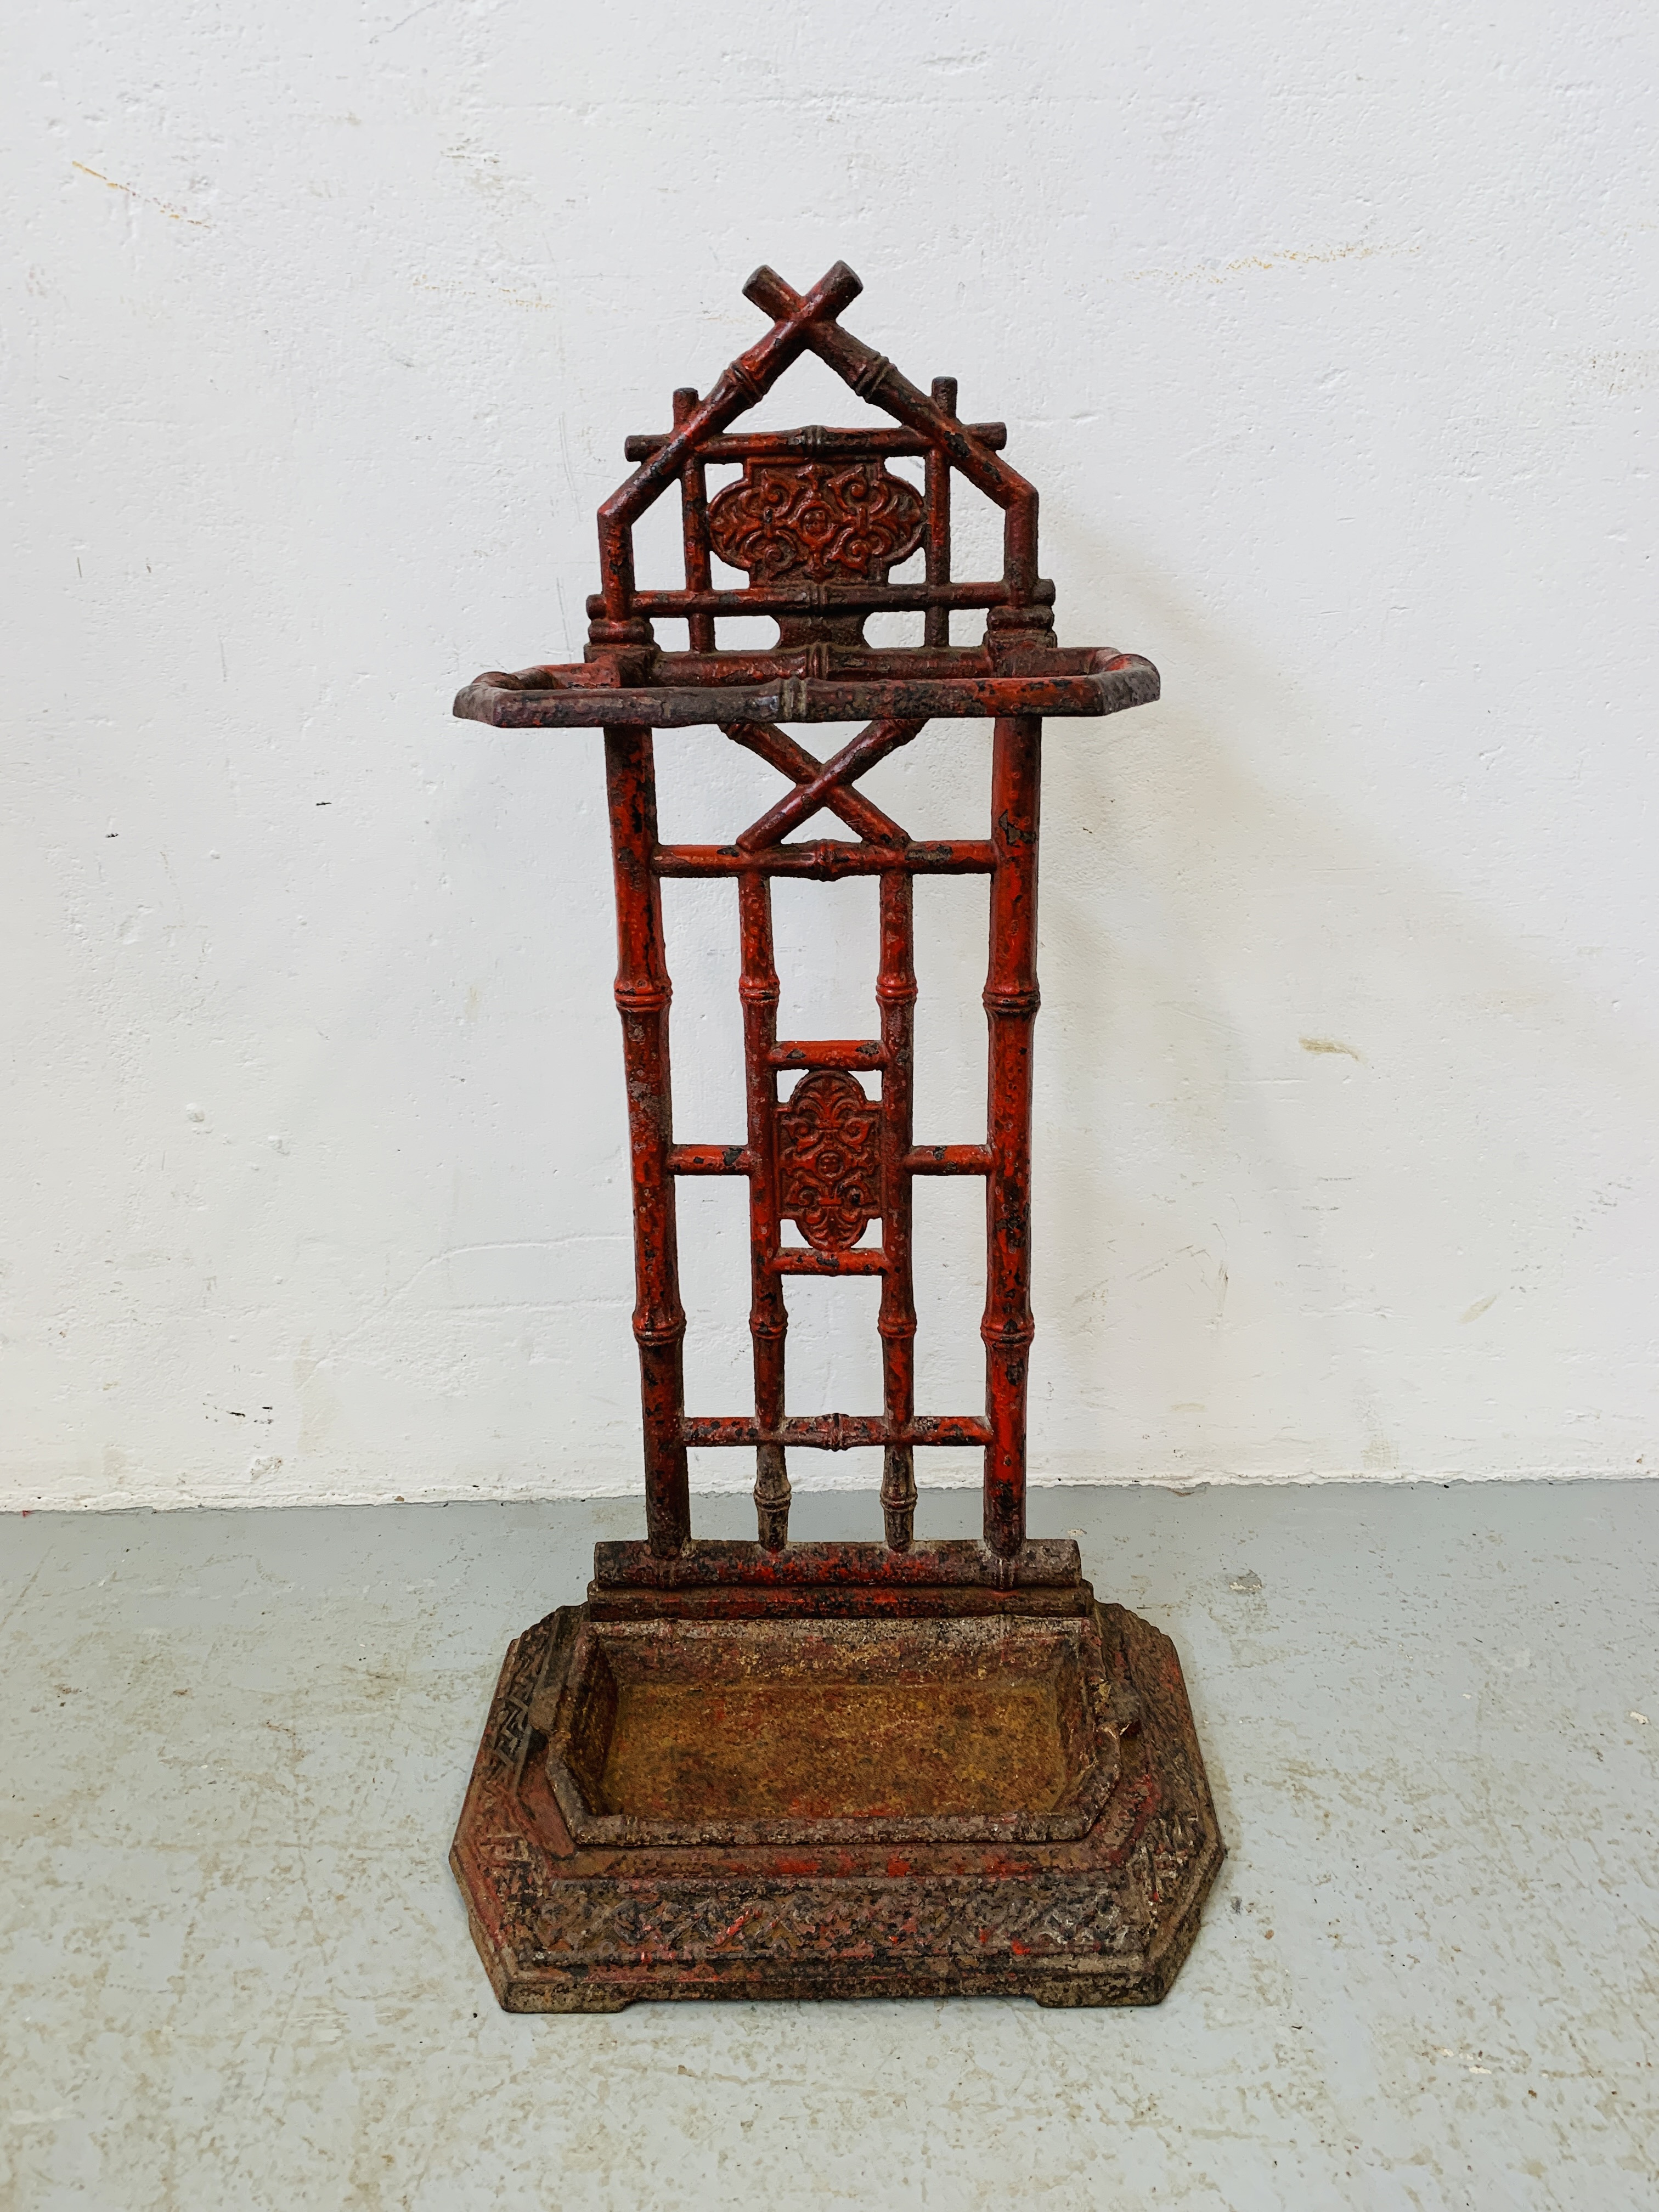 ANTIQUE CAST IRON UMBRELLA STAND - BAMBOO DESIGN (FLAKED RED PAINT) H 70CM.